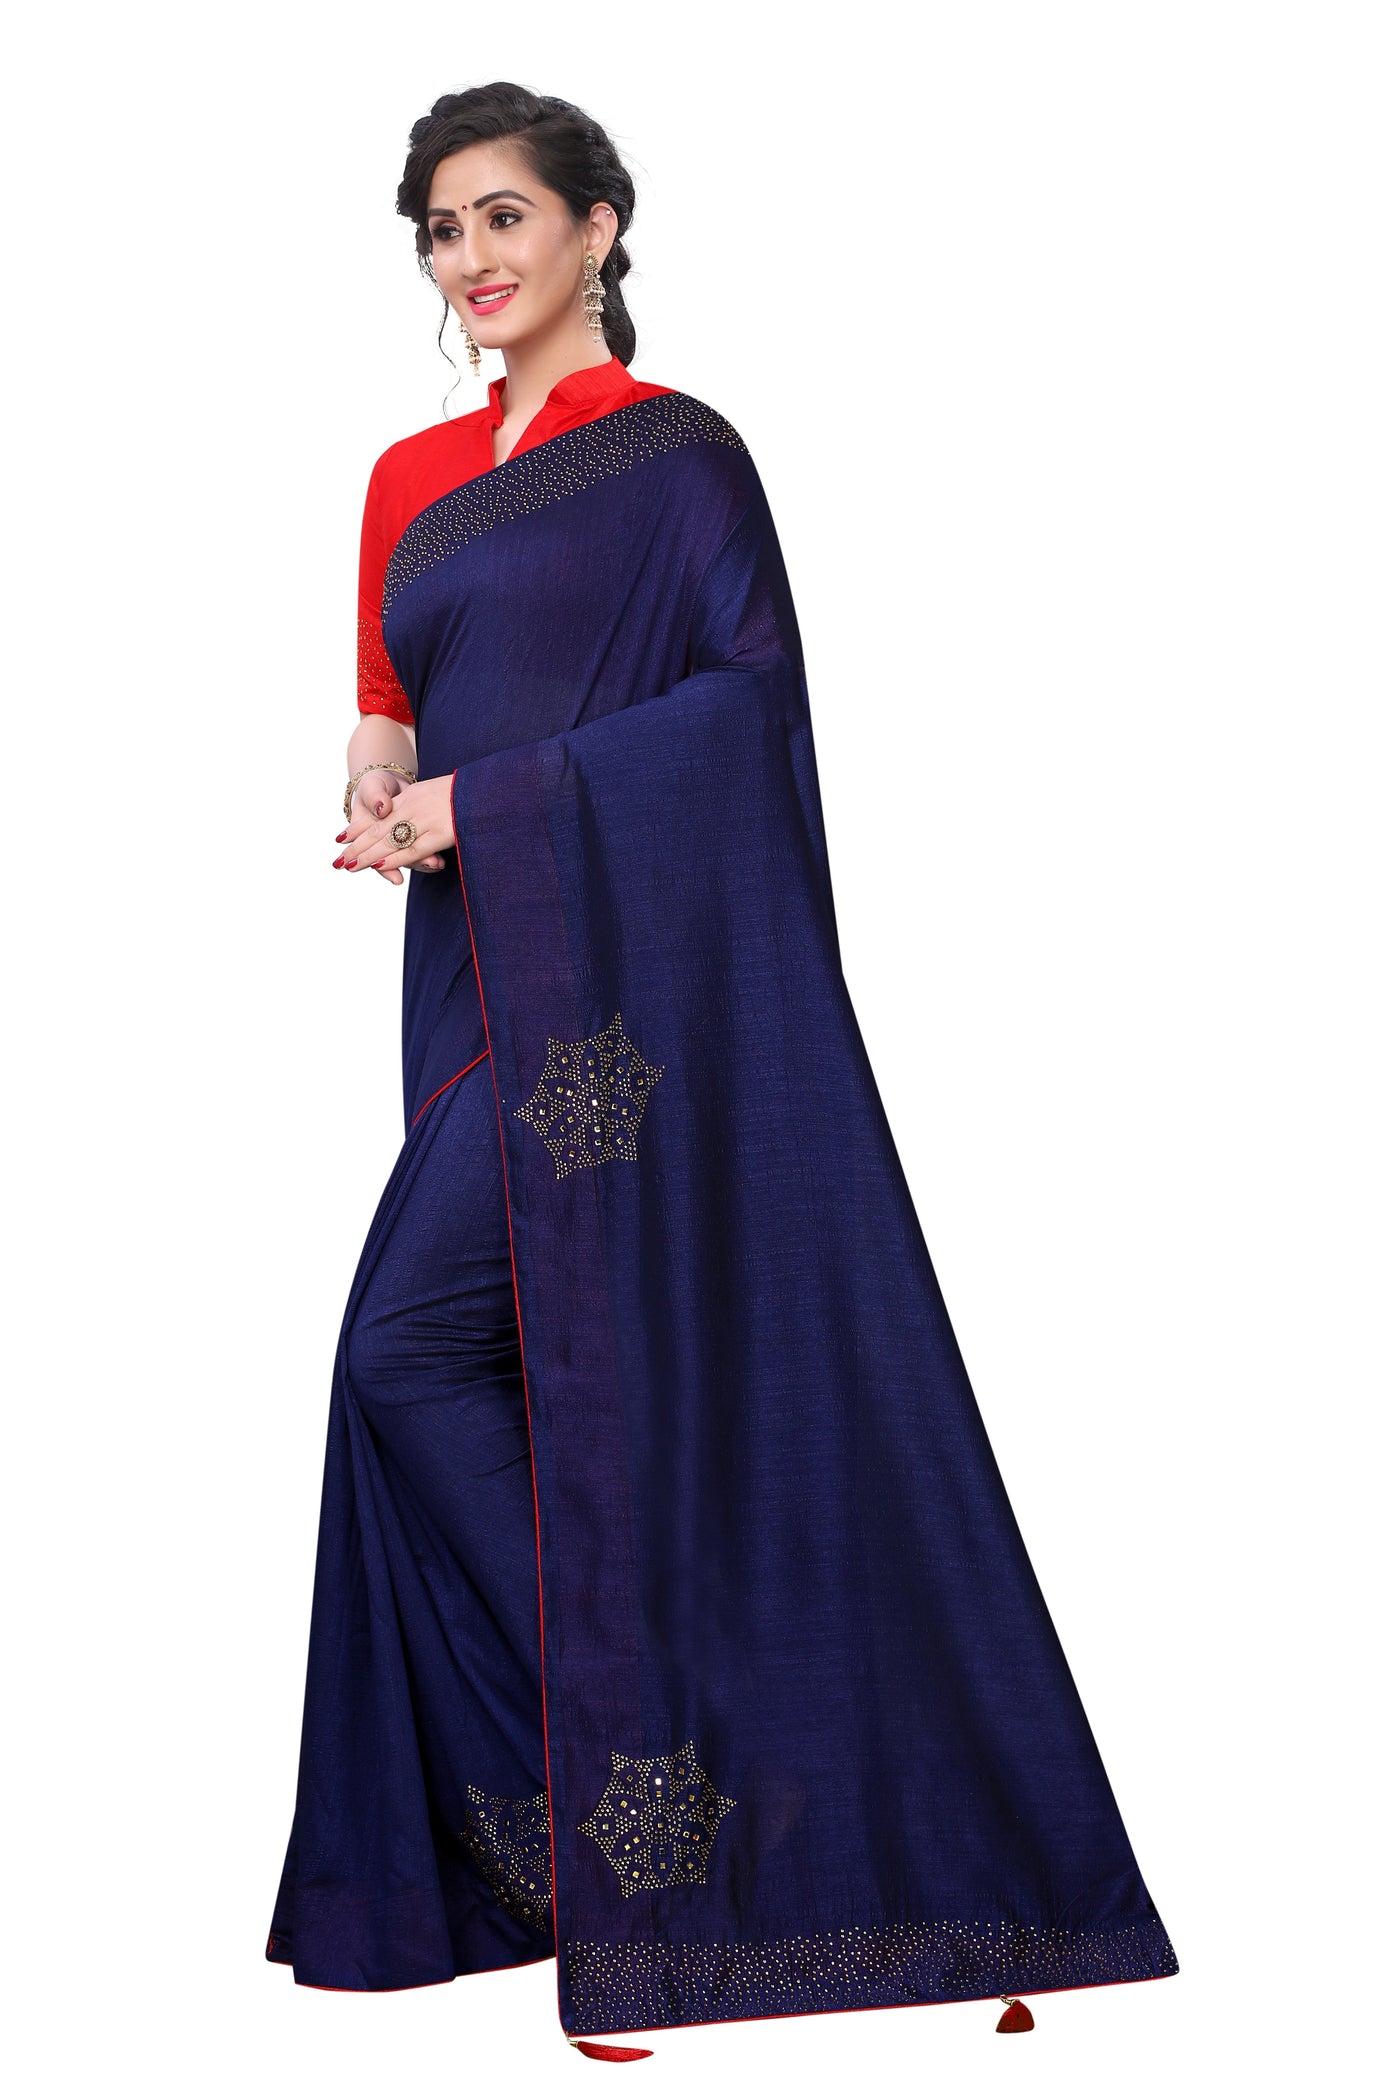 Vichitra Two- Tone Silk Navy Blue Saree With Blouse